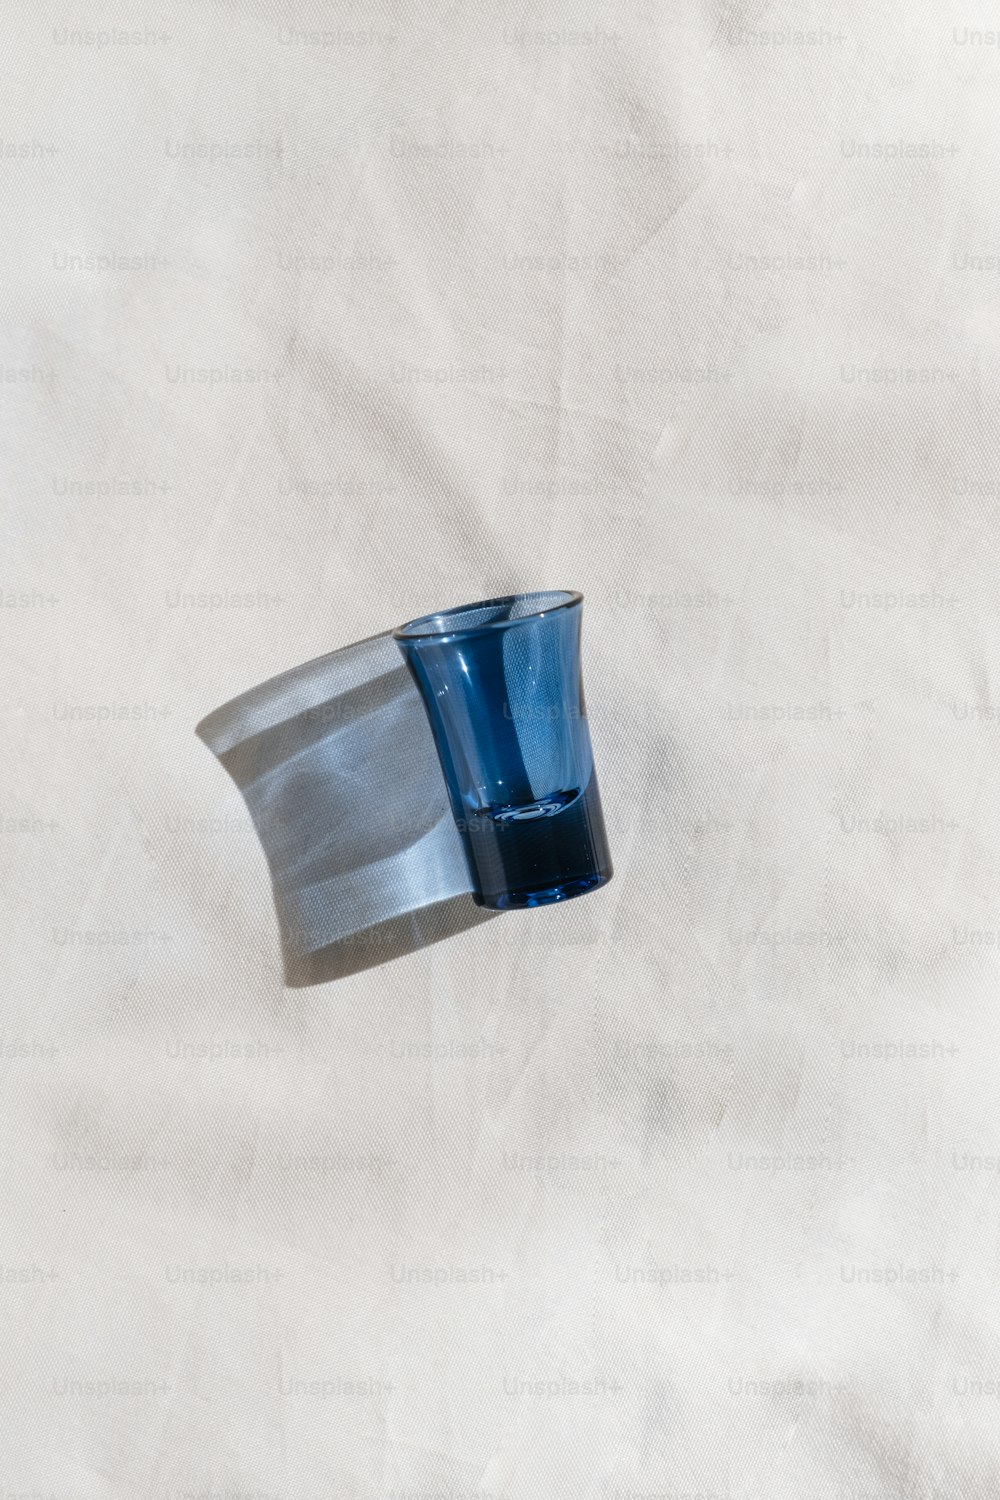 a blue glass sitting on top of a white table